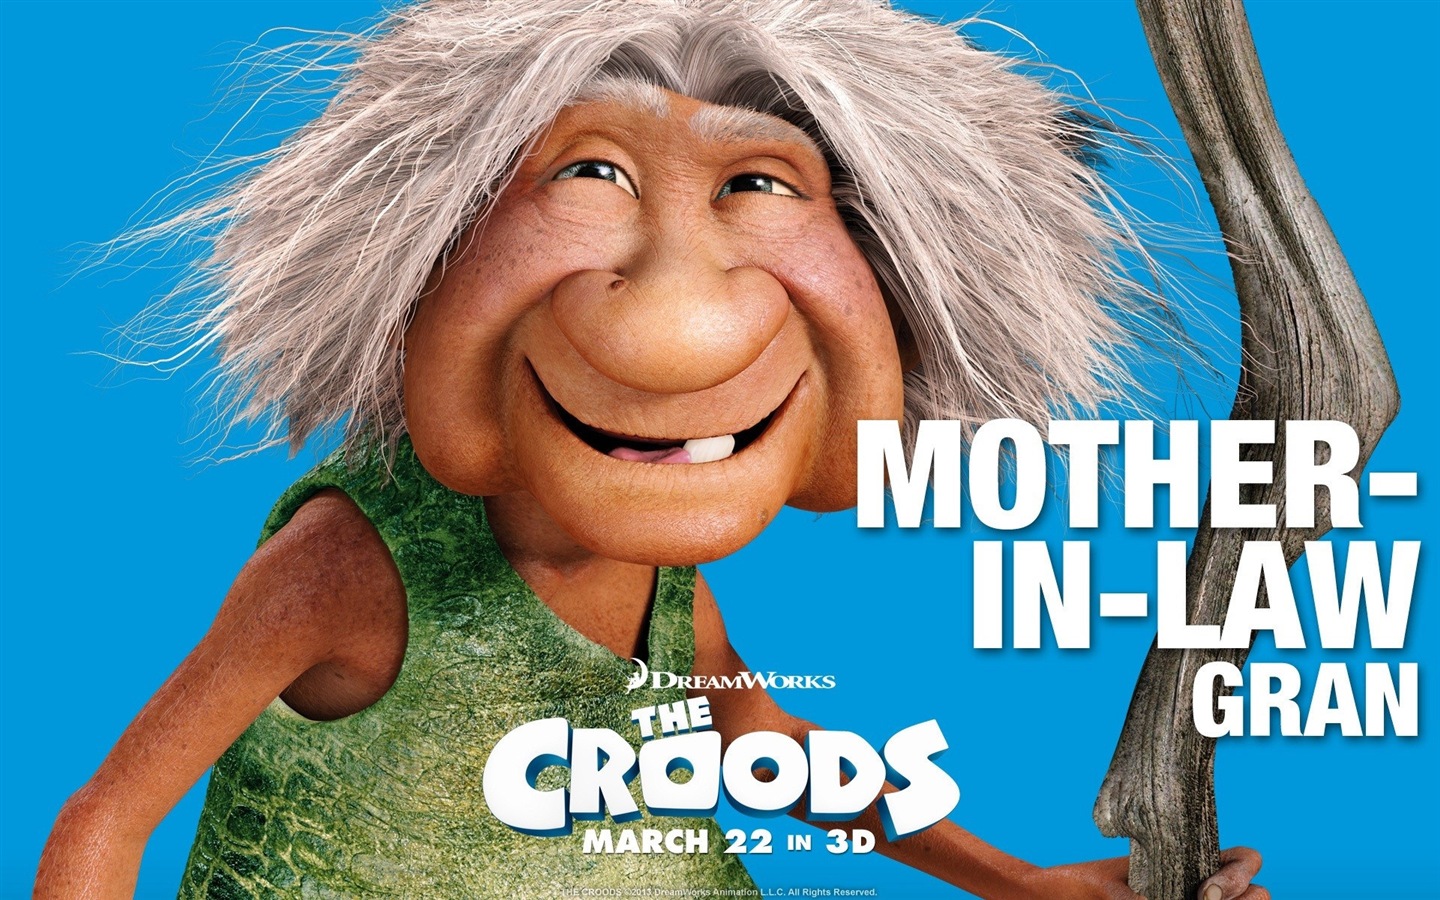 The Croods HD movie wallpapers #6 - 1440x900